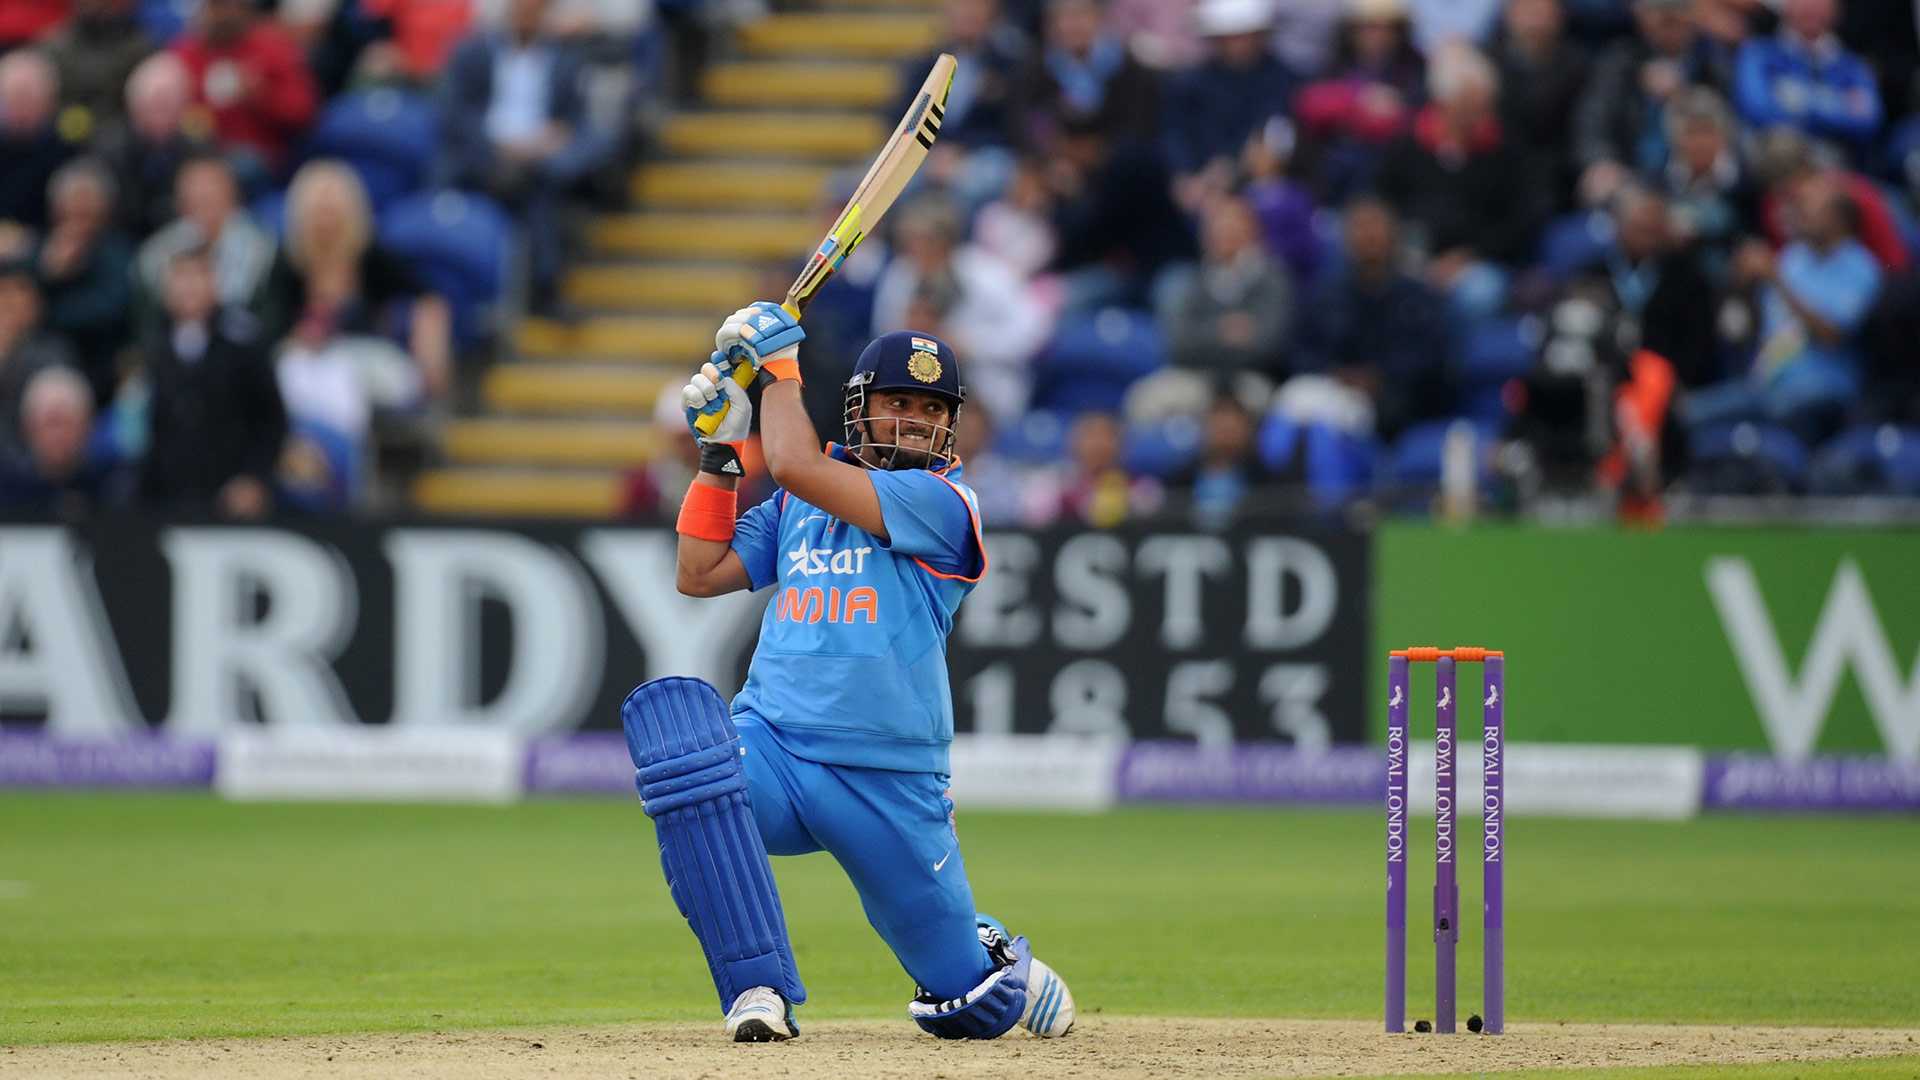 Why Suresh Raina has retired from ‘all formats of cricket’